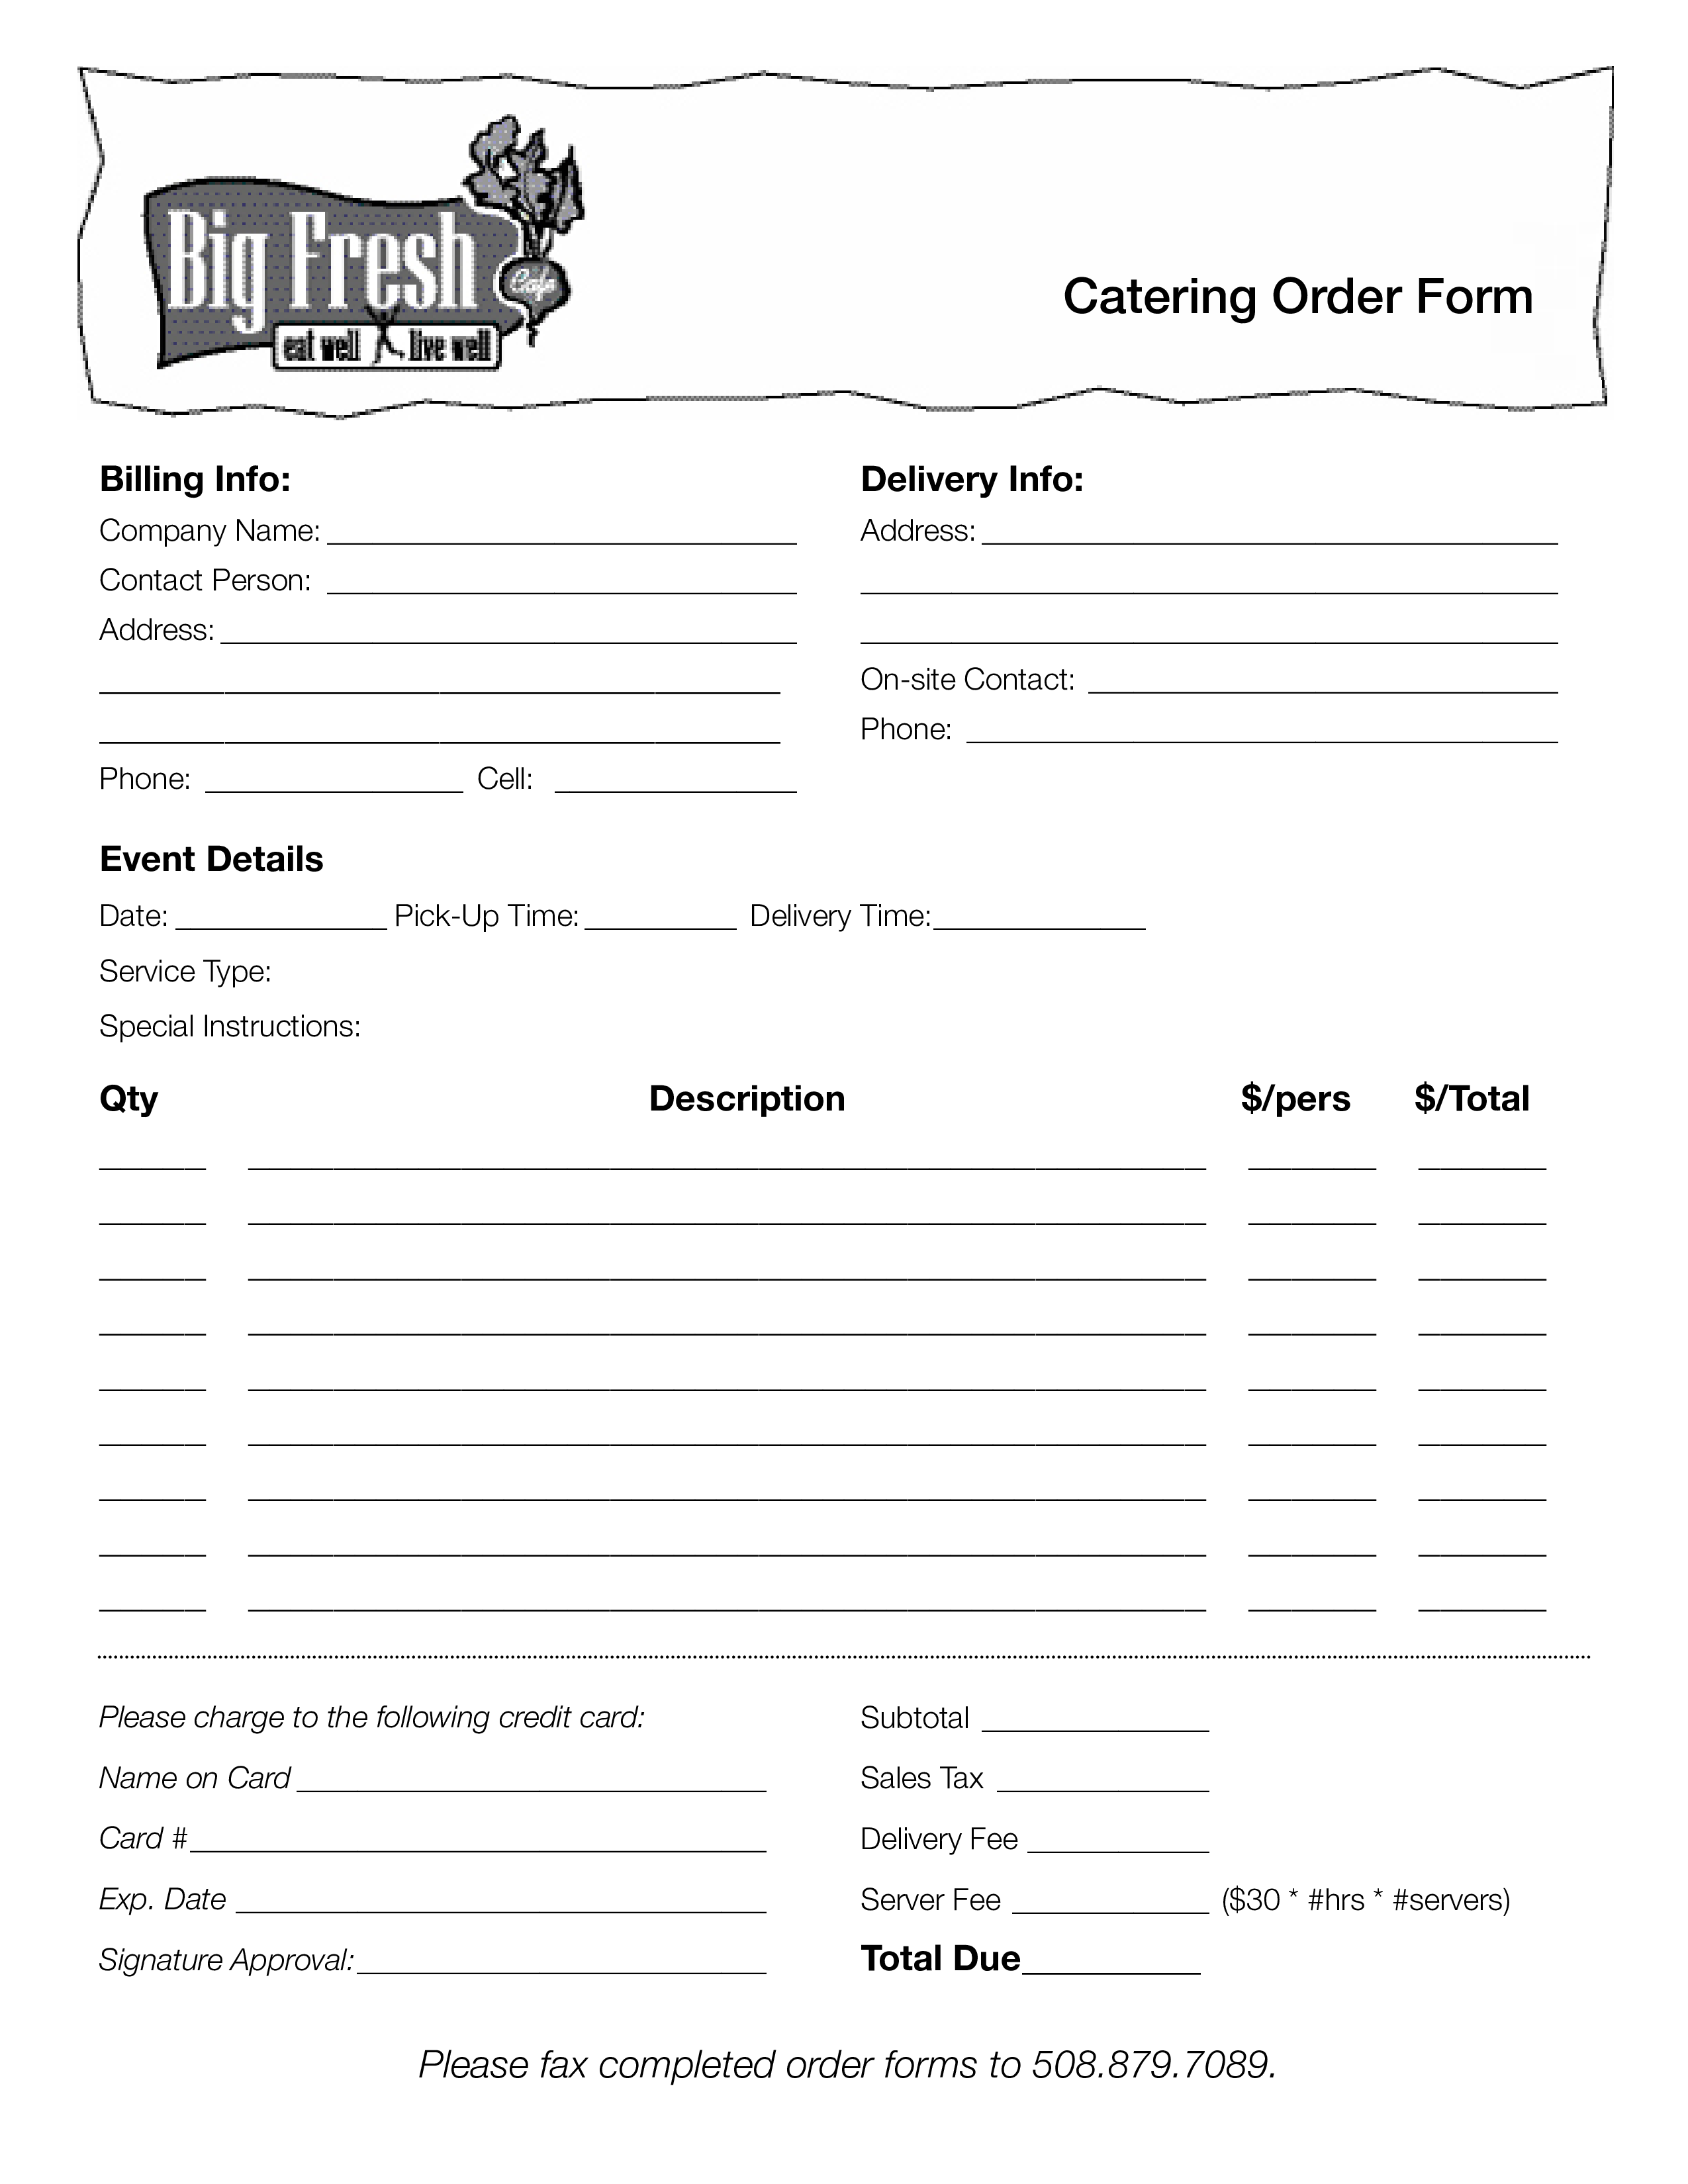 Catering Order Form main image